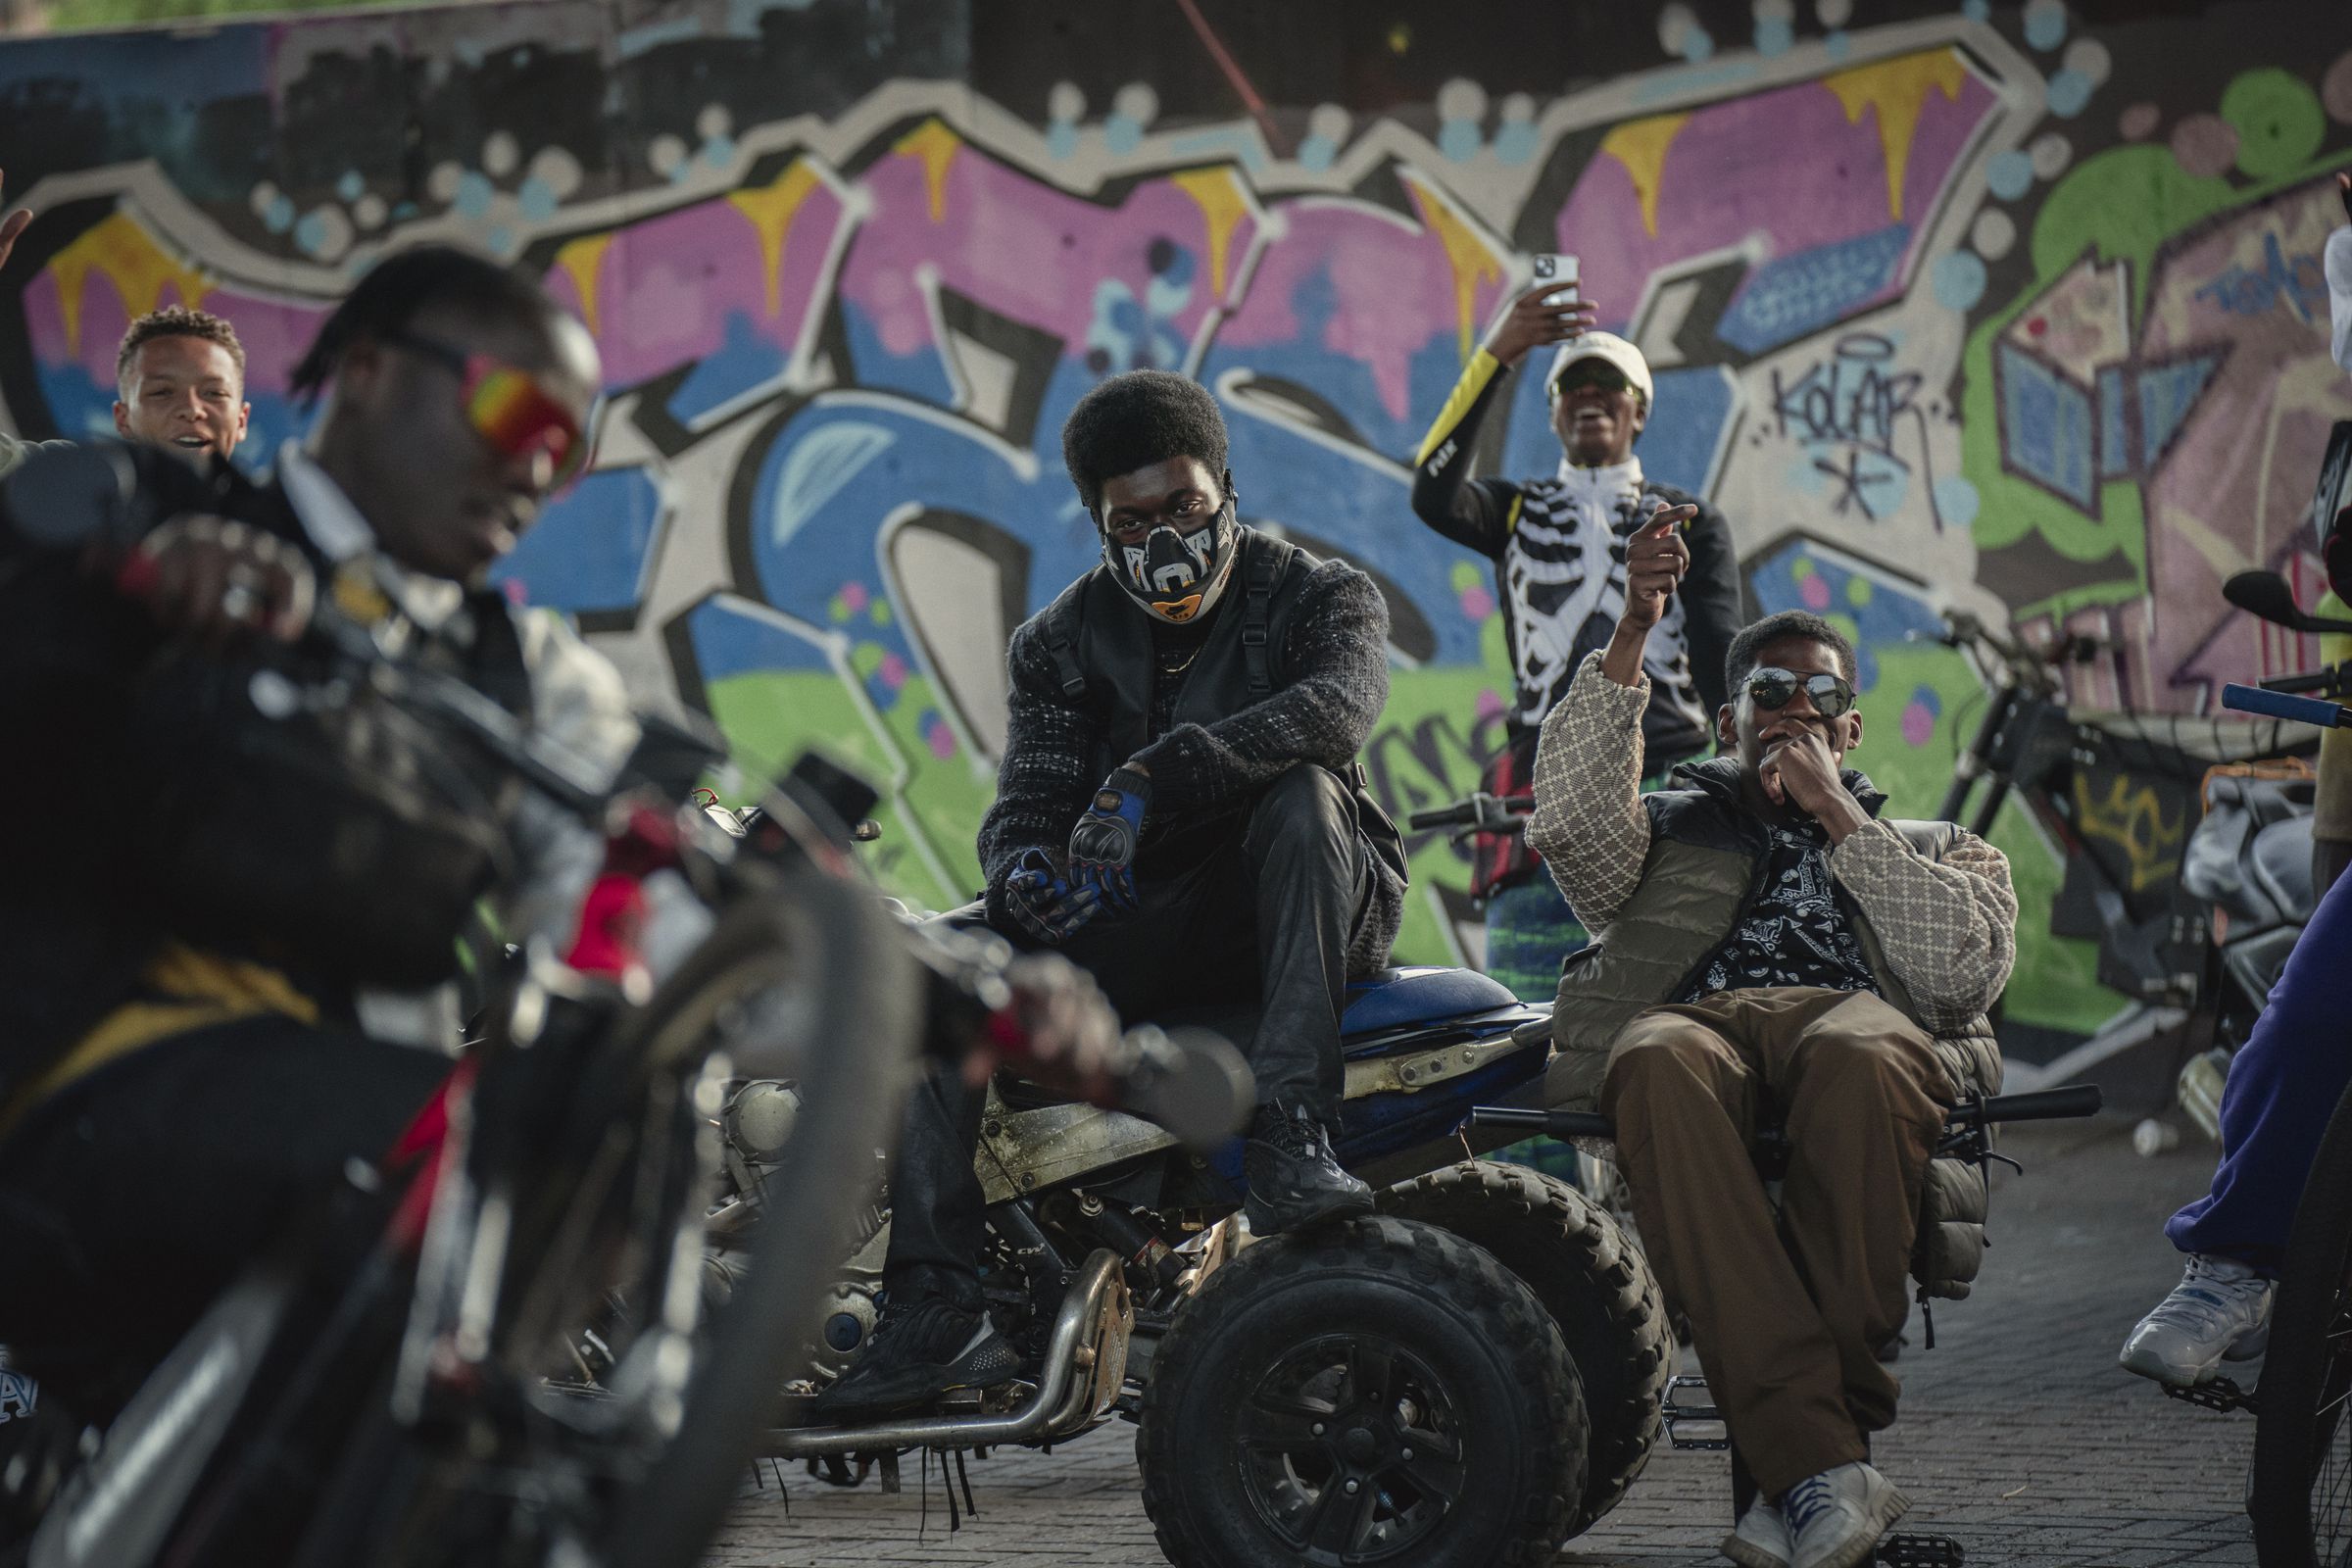 A man wearing a motorcycle mask, black jackets, pants, and boots sitting on top of an ATV. Around the man is an assortment of other people sitting on motorized bikes and motorcycles doing tricks, and behind the group is a massive wall covered in street art.